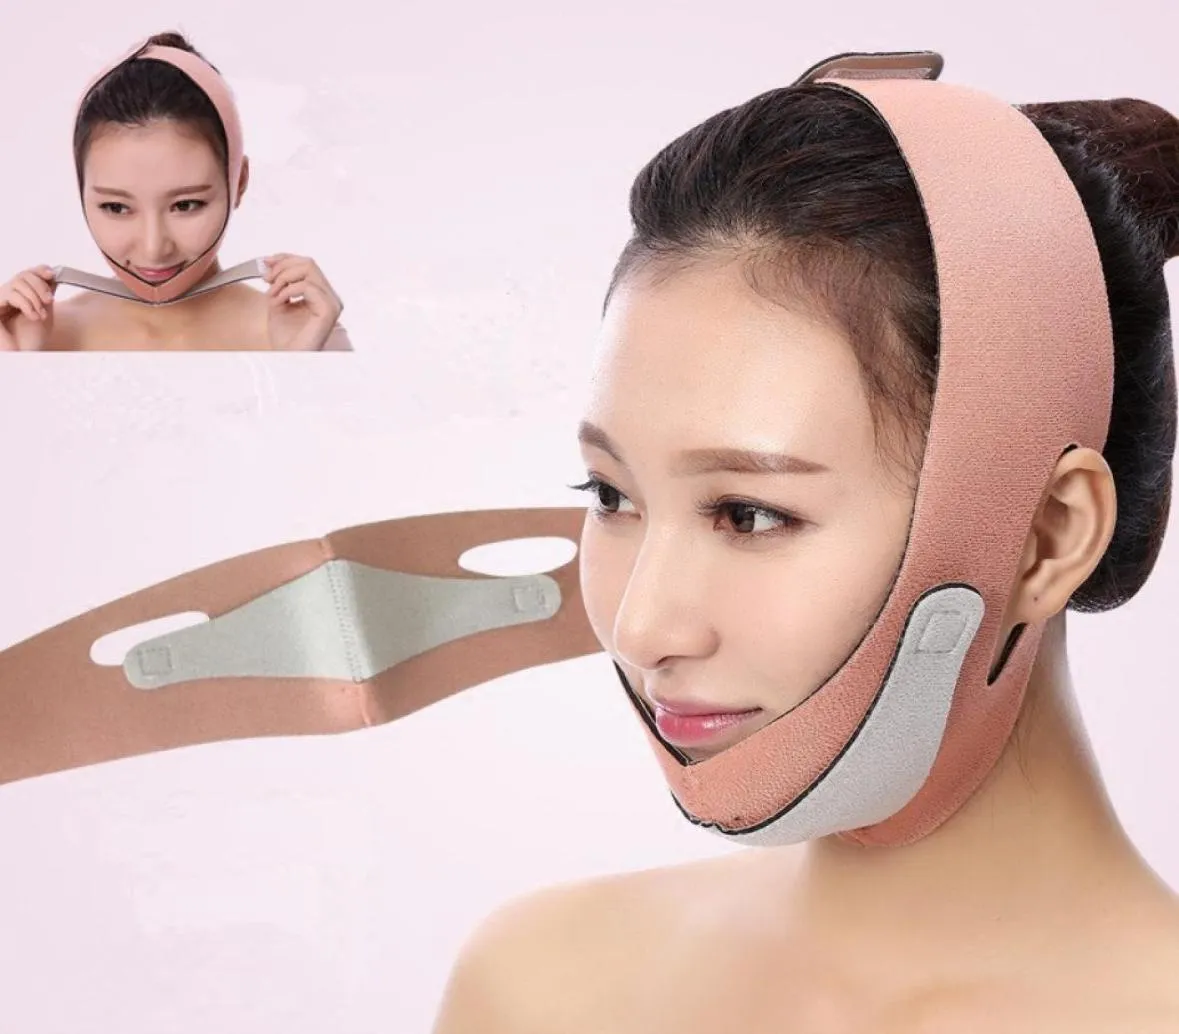 V Face Lift Up Tape Anti Wrinkles Mask Ultrathin Double Chin Removal Slimming Lifting Face Slimmer Mask Strap Band9131462